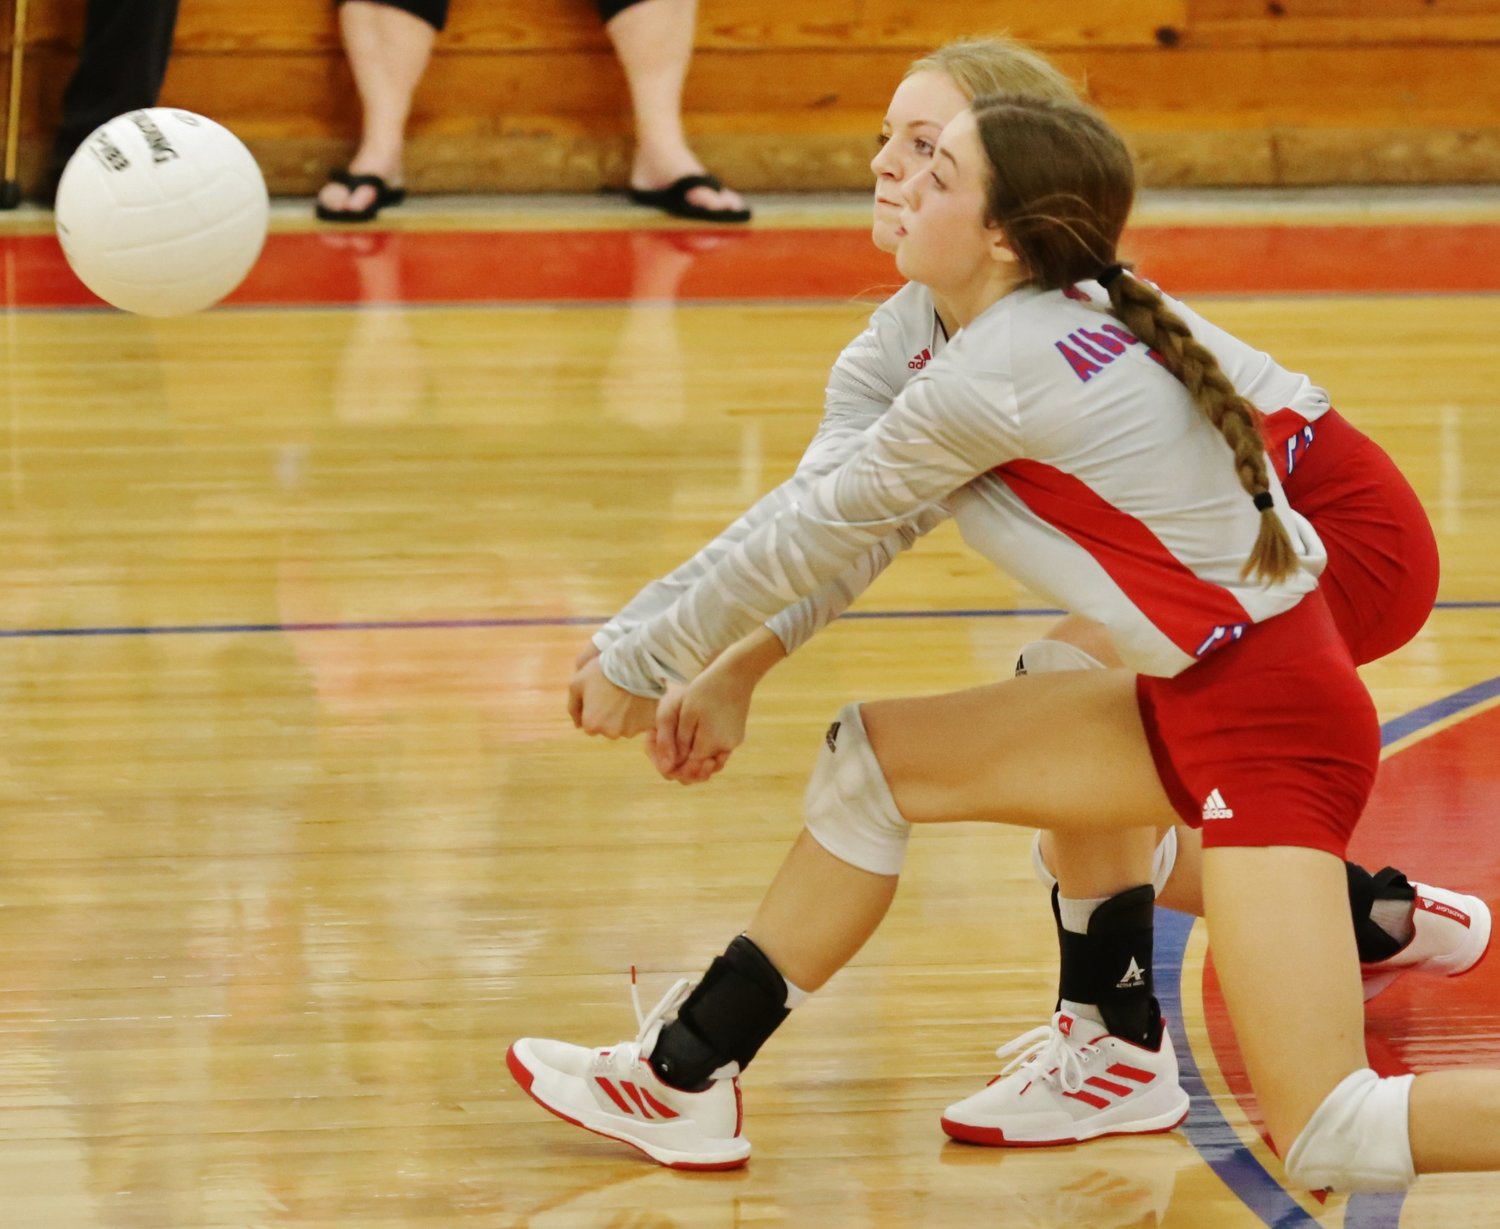 Alba-Golden’s backline, Cacie Lennon and Kamrin Wright, moves in for a dig against Cumby last Friday.